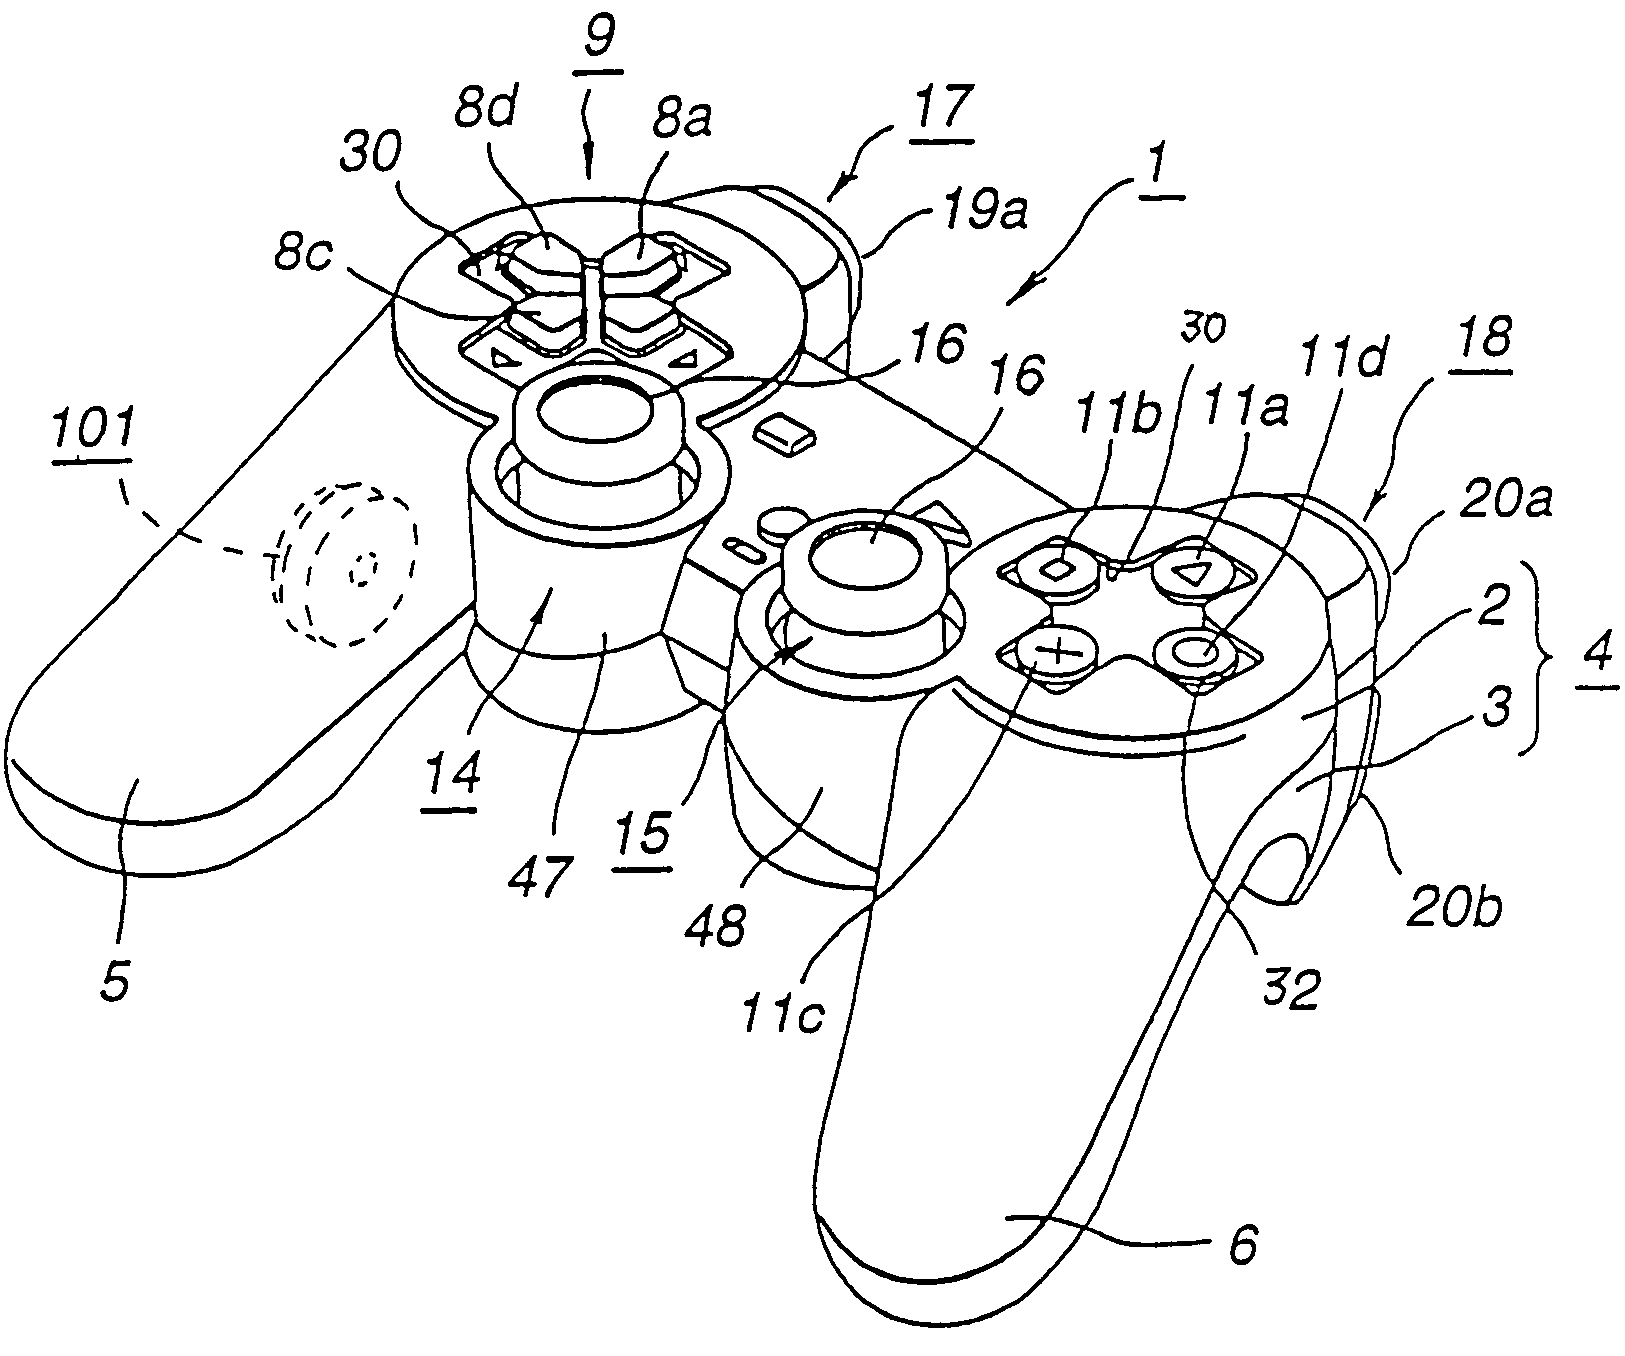 Control unit and system utilizing the control unit